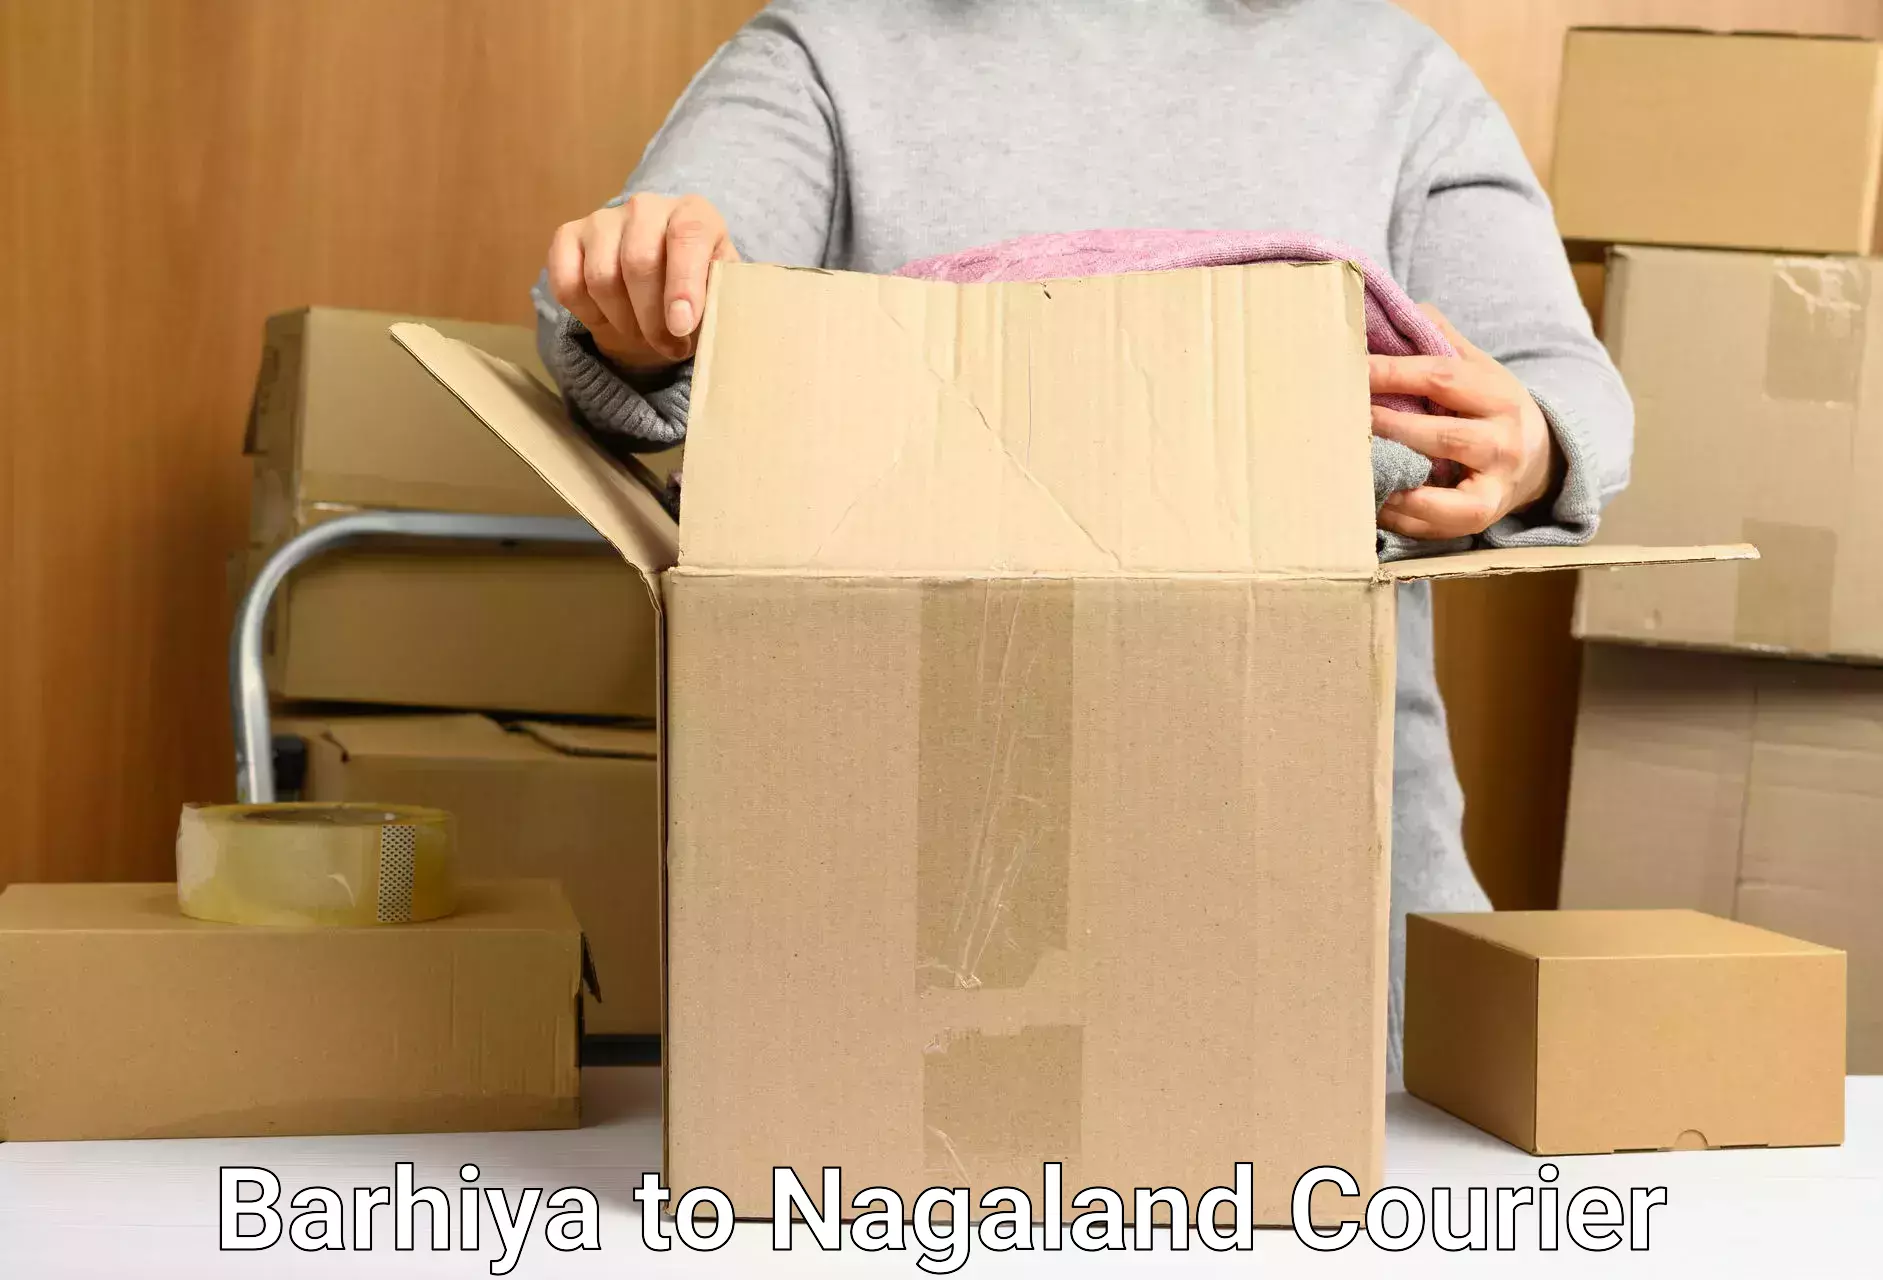 Flexible delivery schedules Barhiya to Nagaland